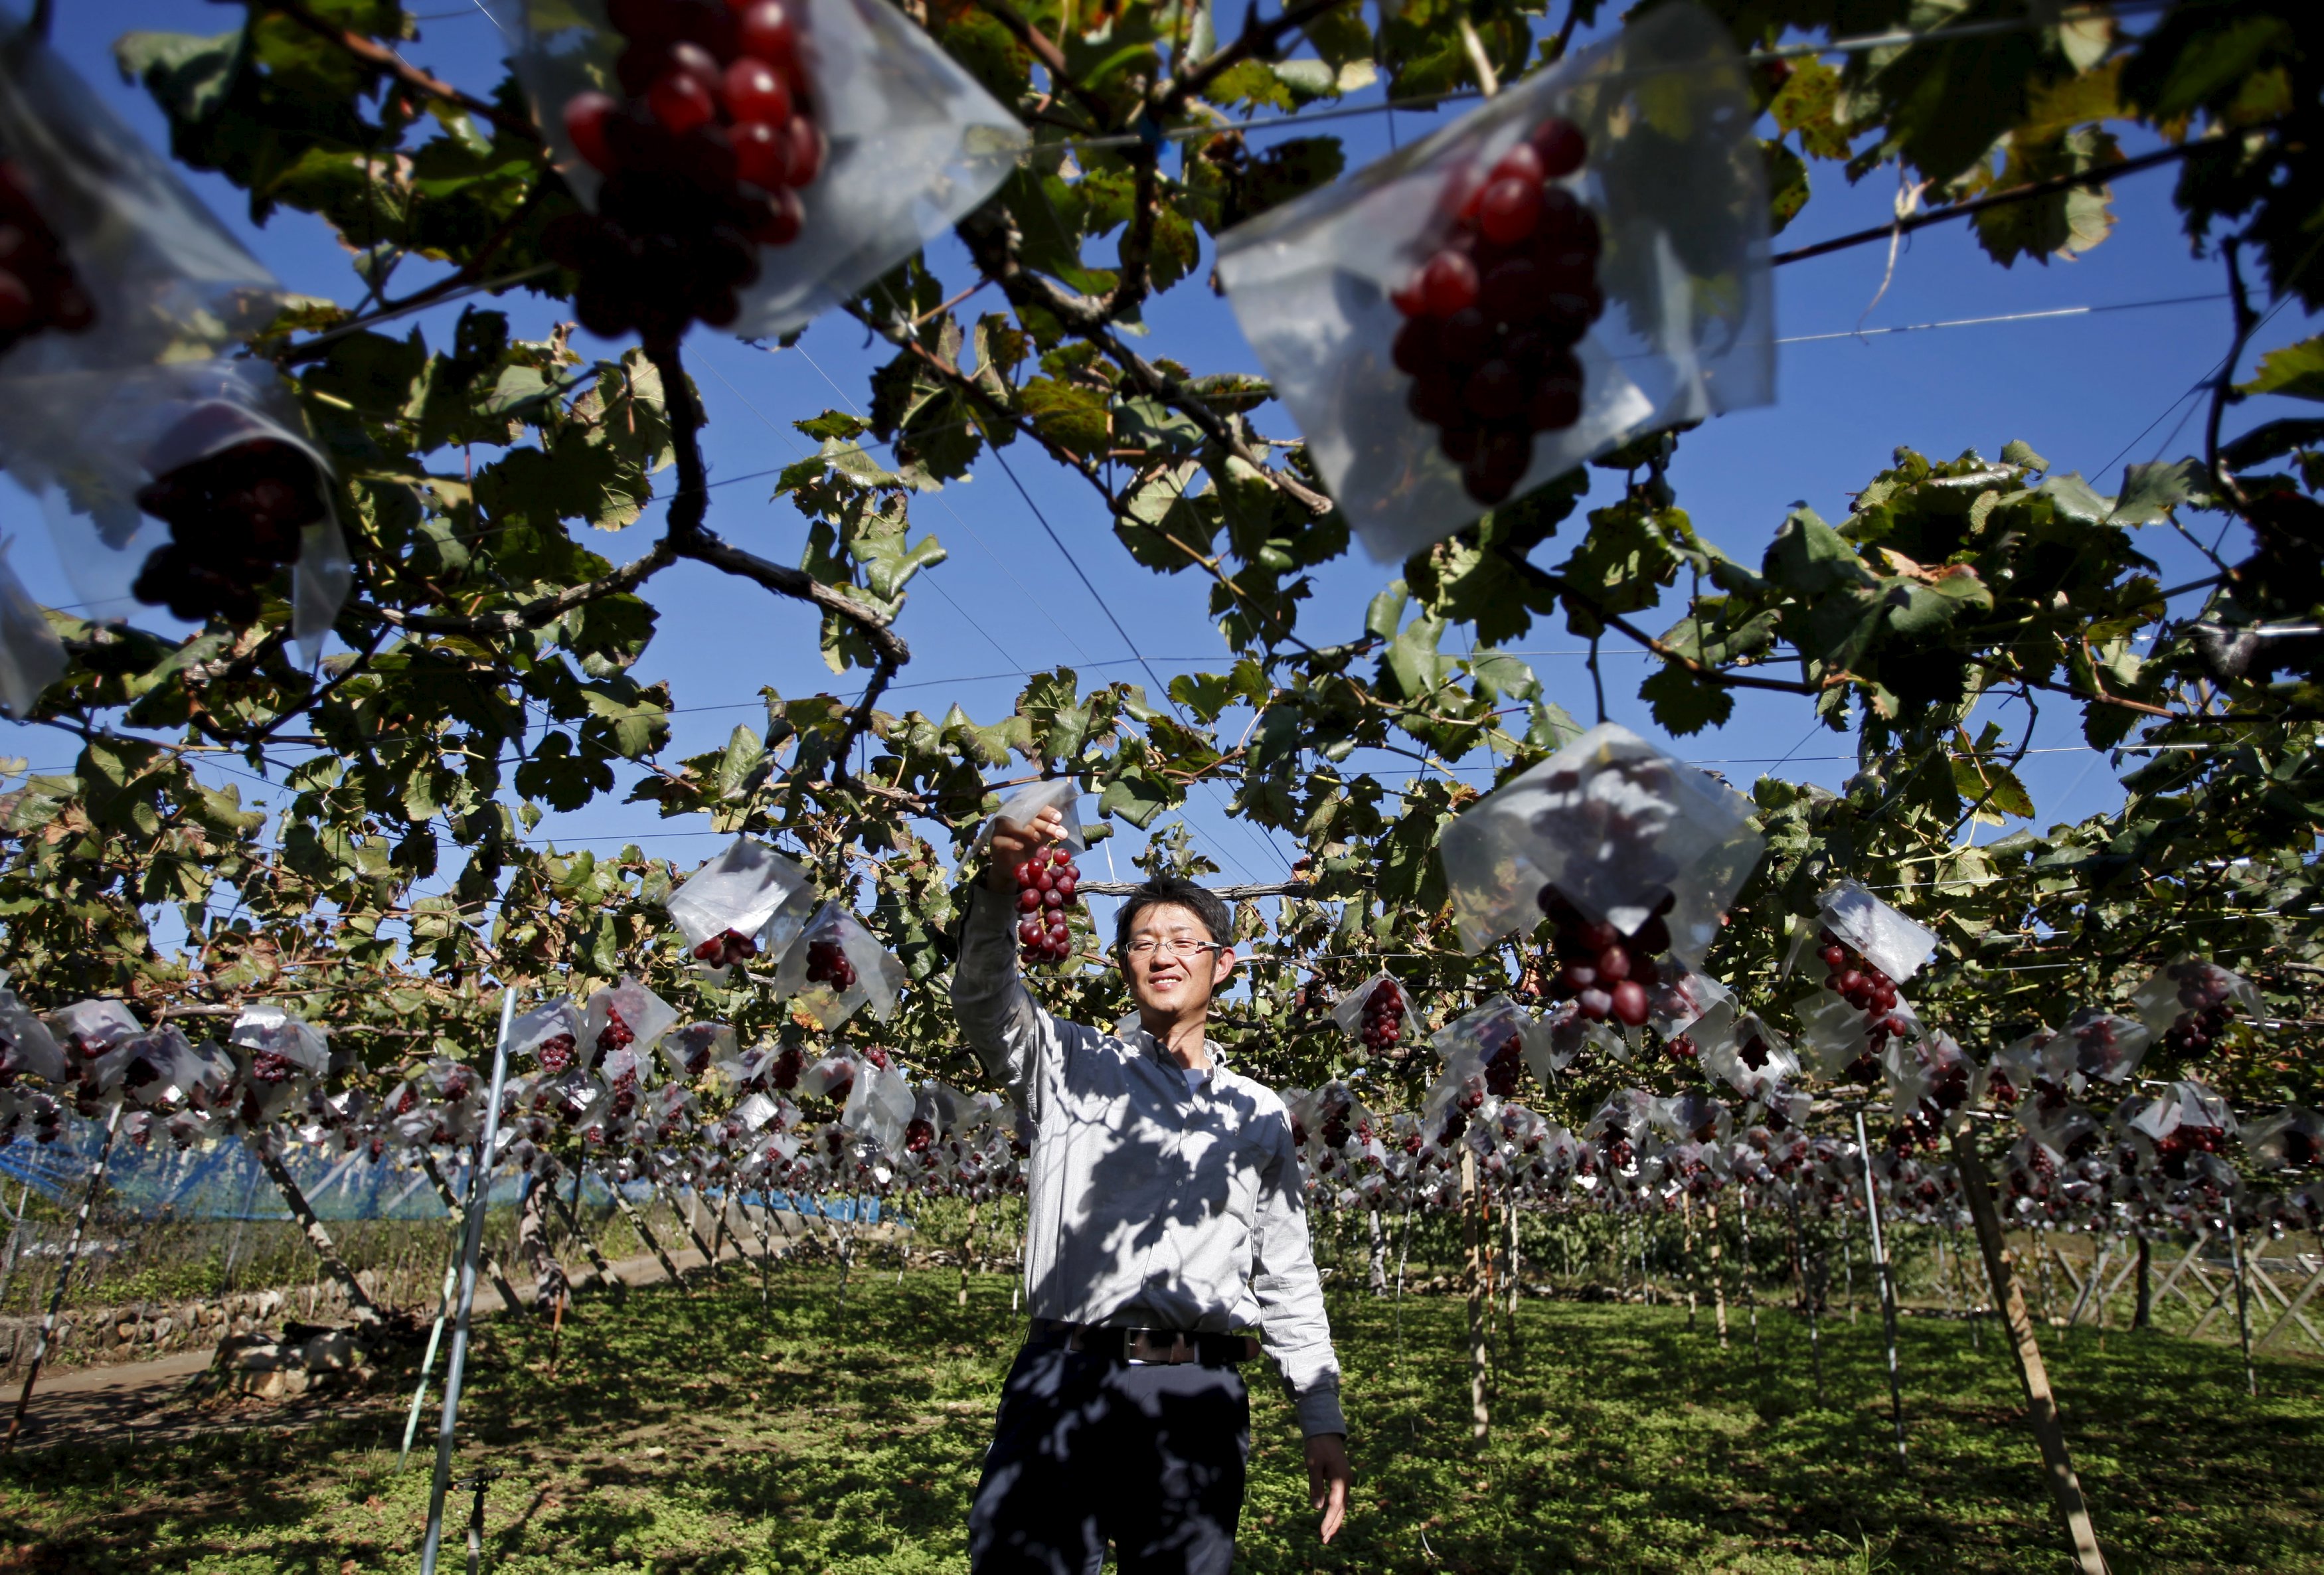 Soichi Furuya, a third generation fruit farmer, holds a bunch of grapes on grape vines at a fruit farm in Fuefuki, Yamanashi prefecture, Japan October 8, 2015. REUTERS/Hyun Oh